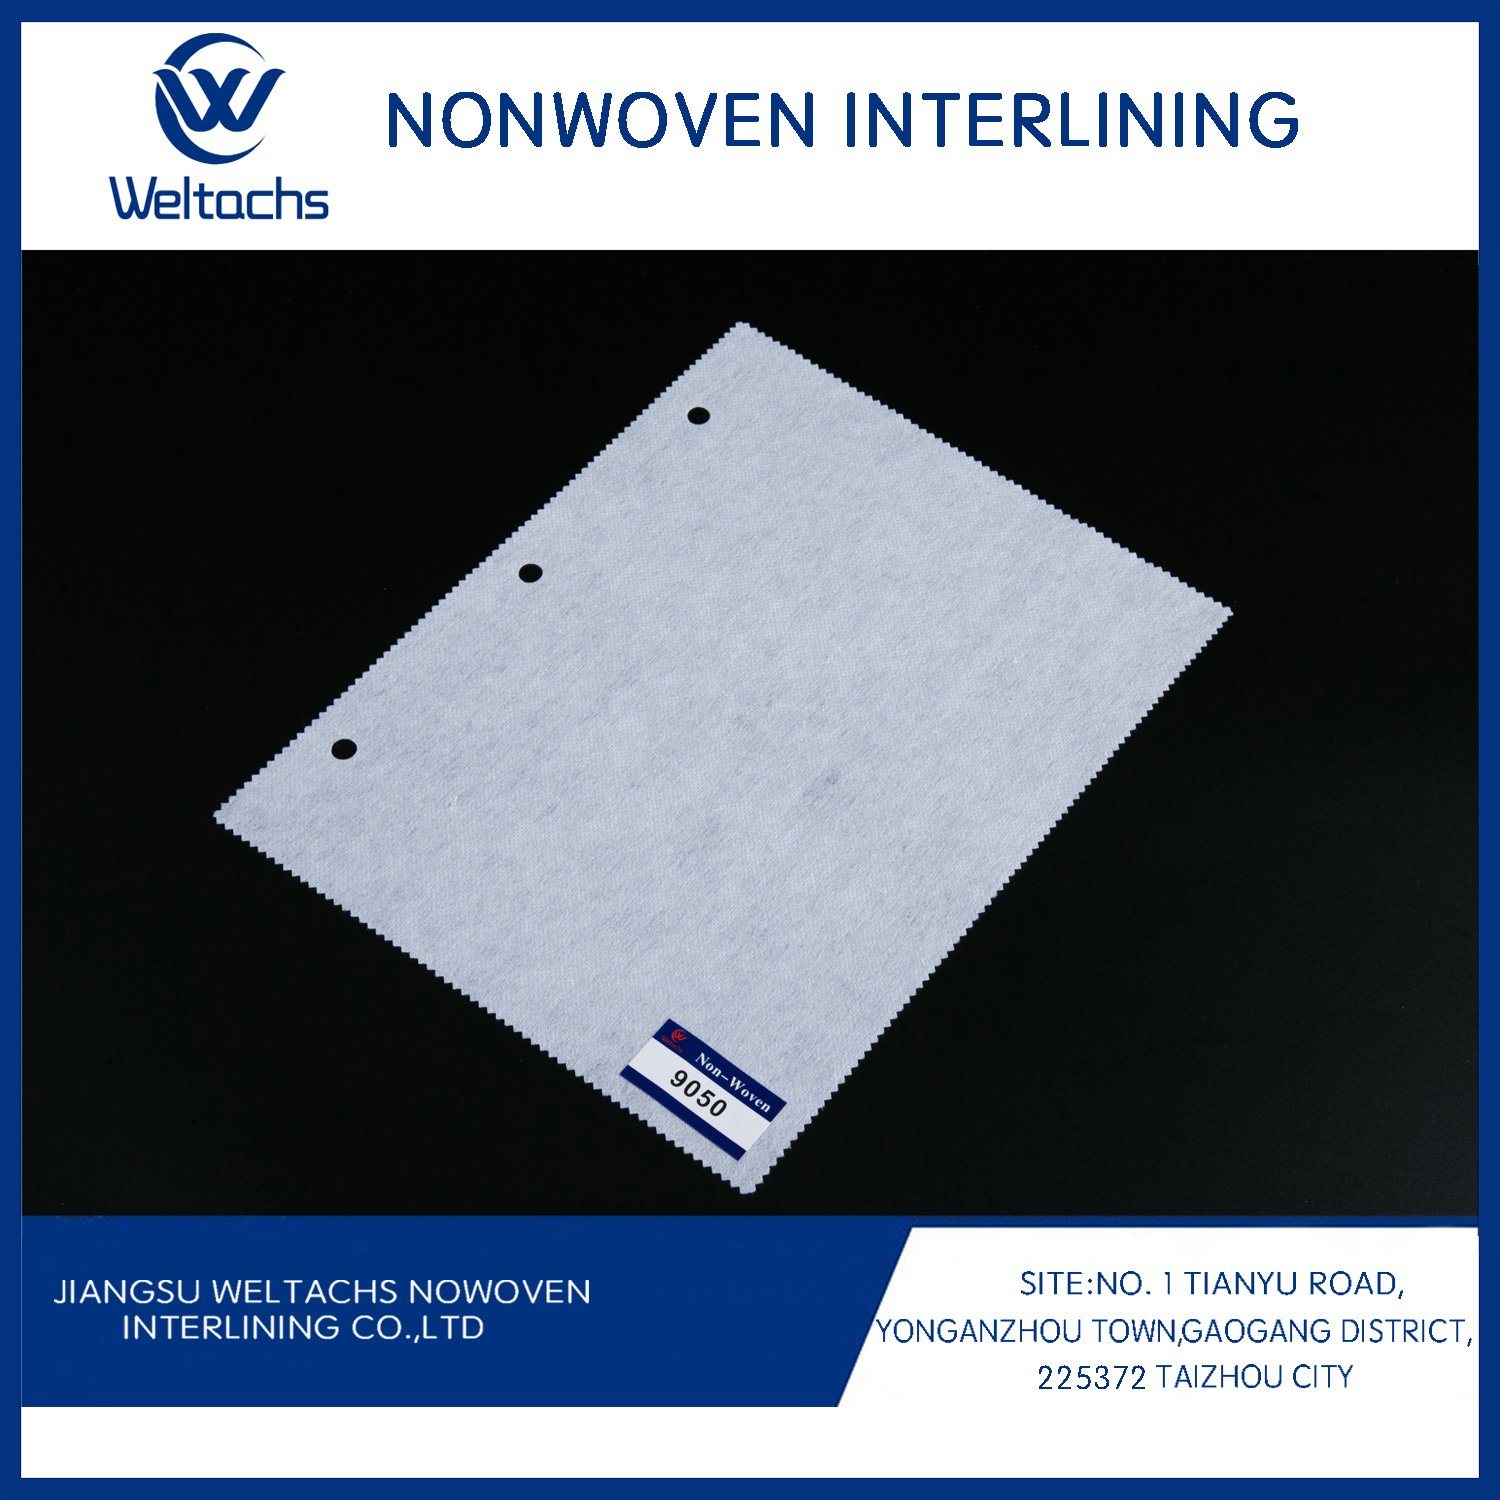 Gum Stay Non Woven Chemical Bonded Base Fabric and Scatter Fused Embroidery Stabilizer Fusing Interlining